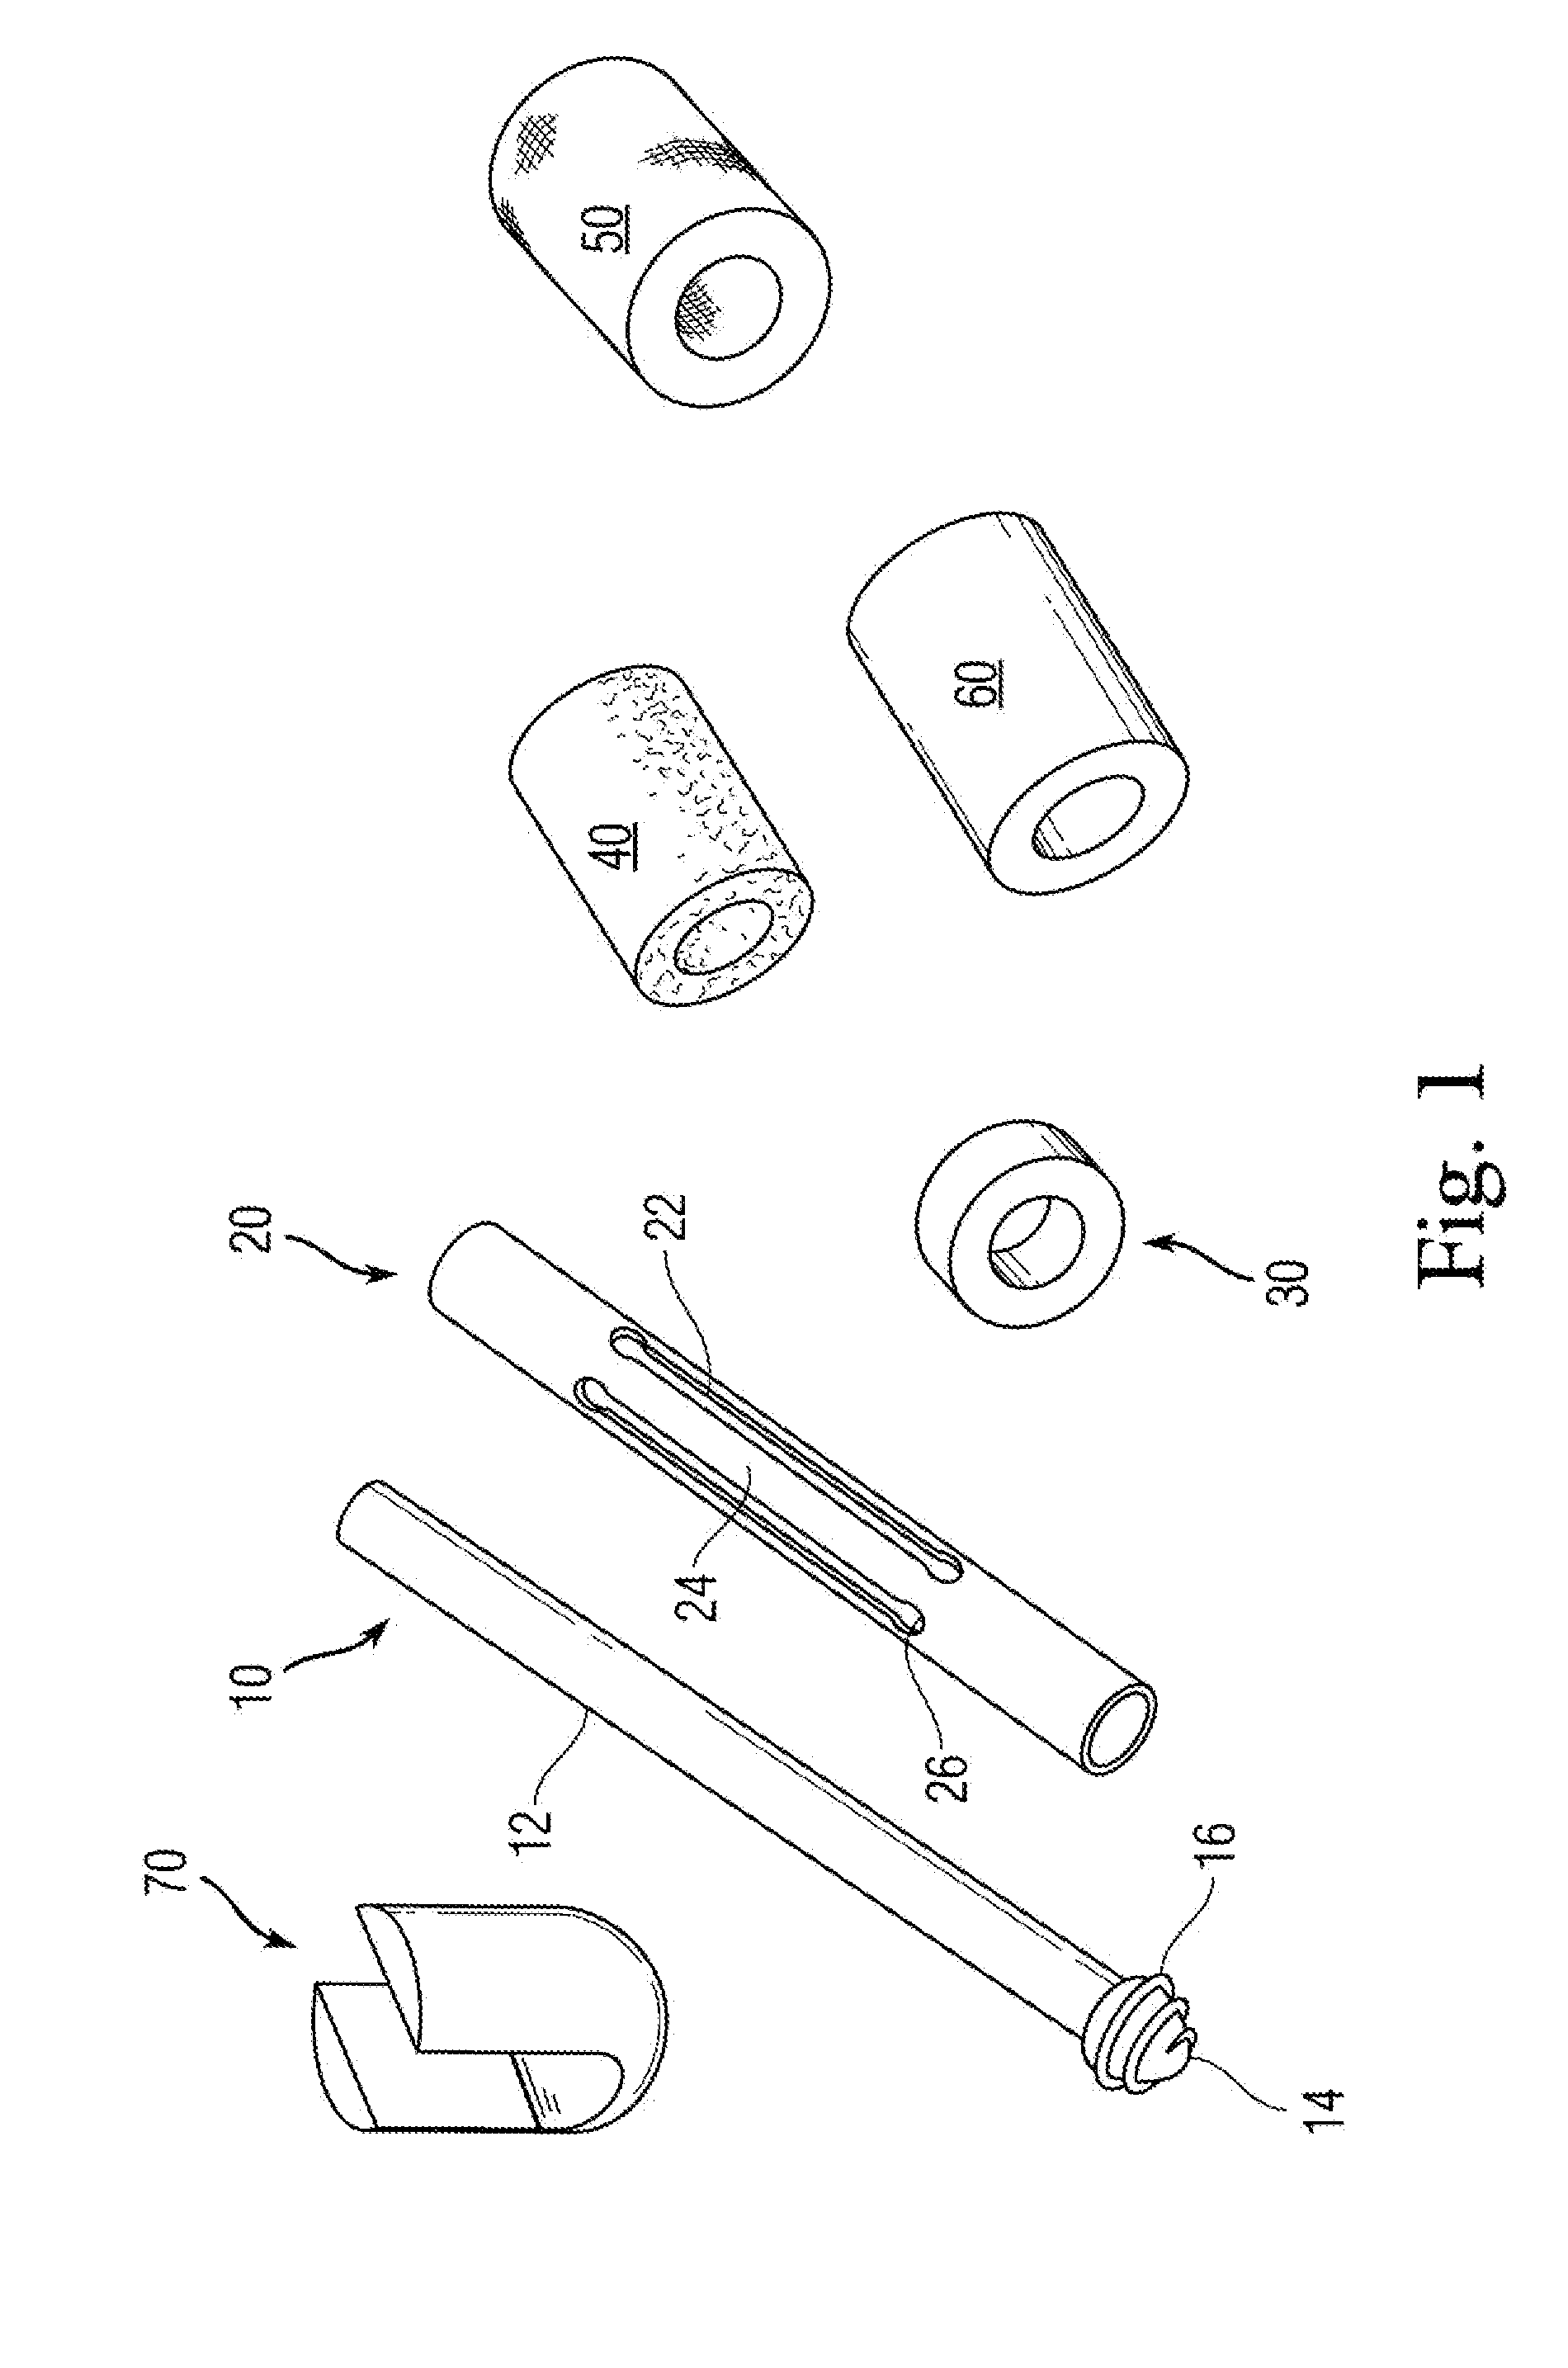 Pedicle screw with expansion anchor sleeve